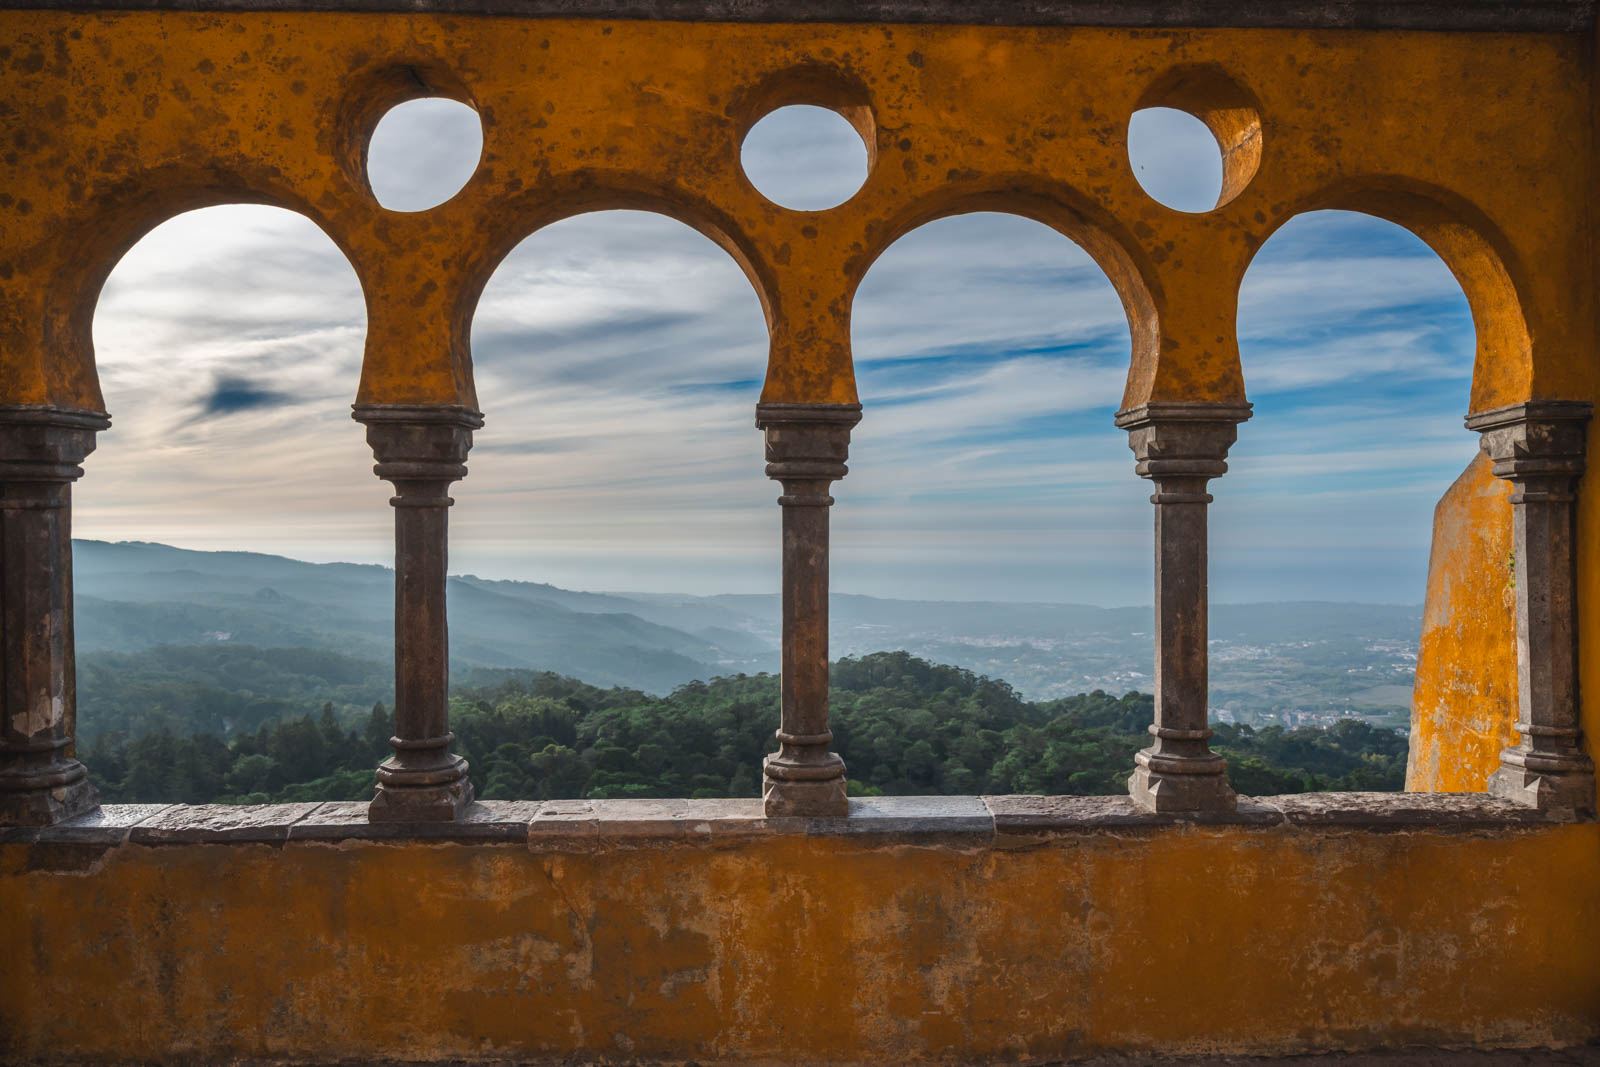 One day Sintra itinerary